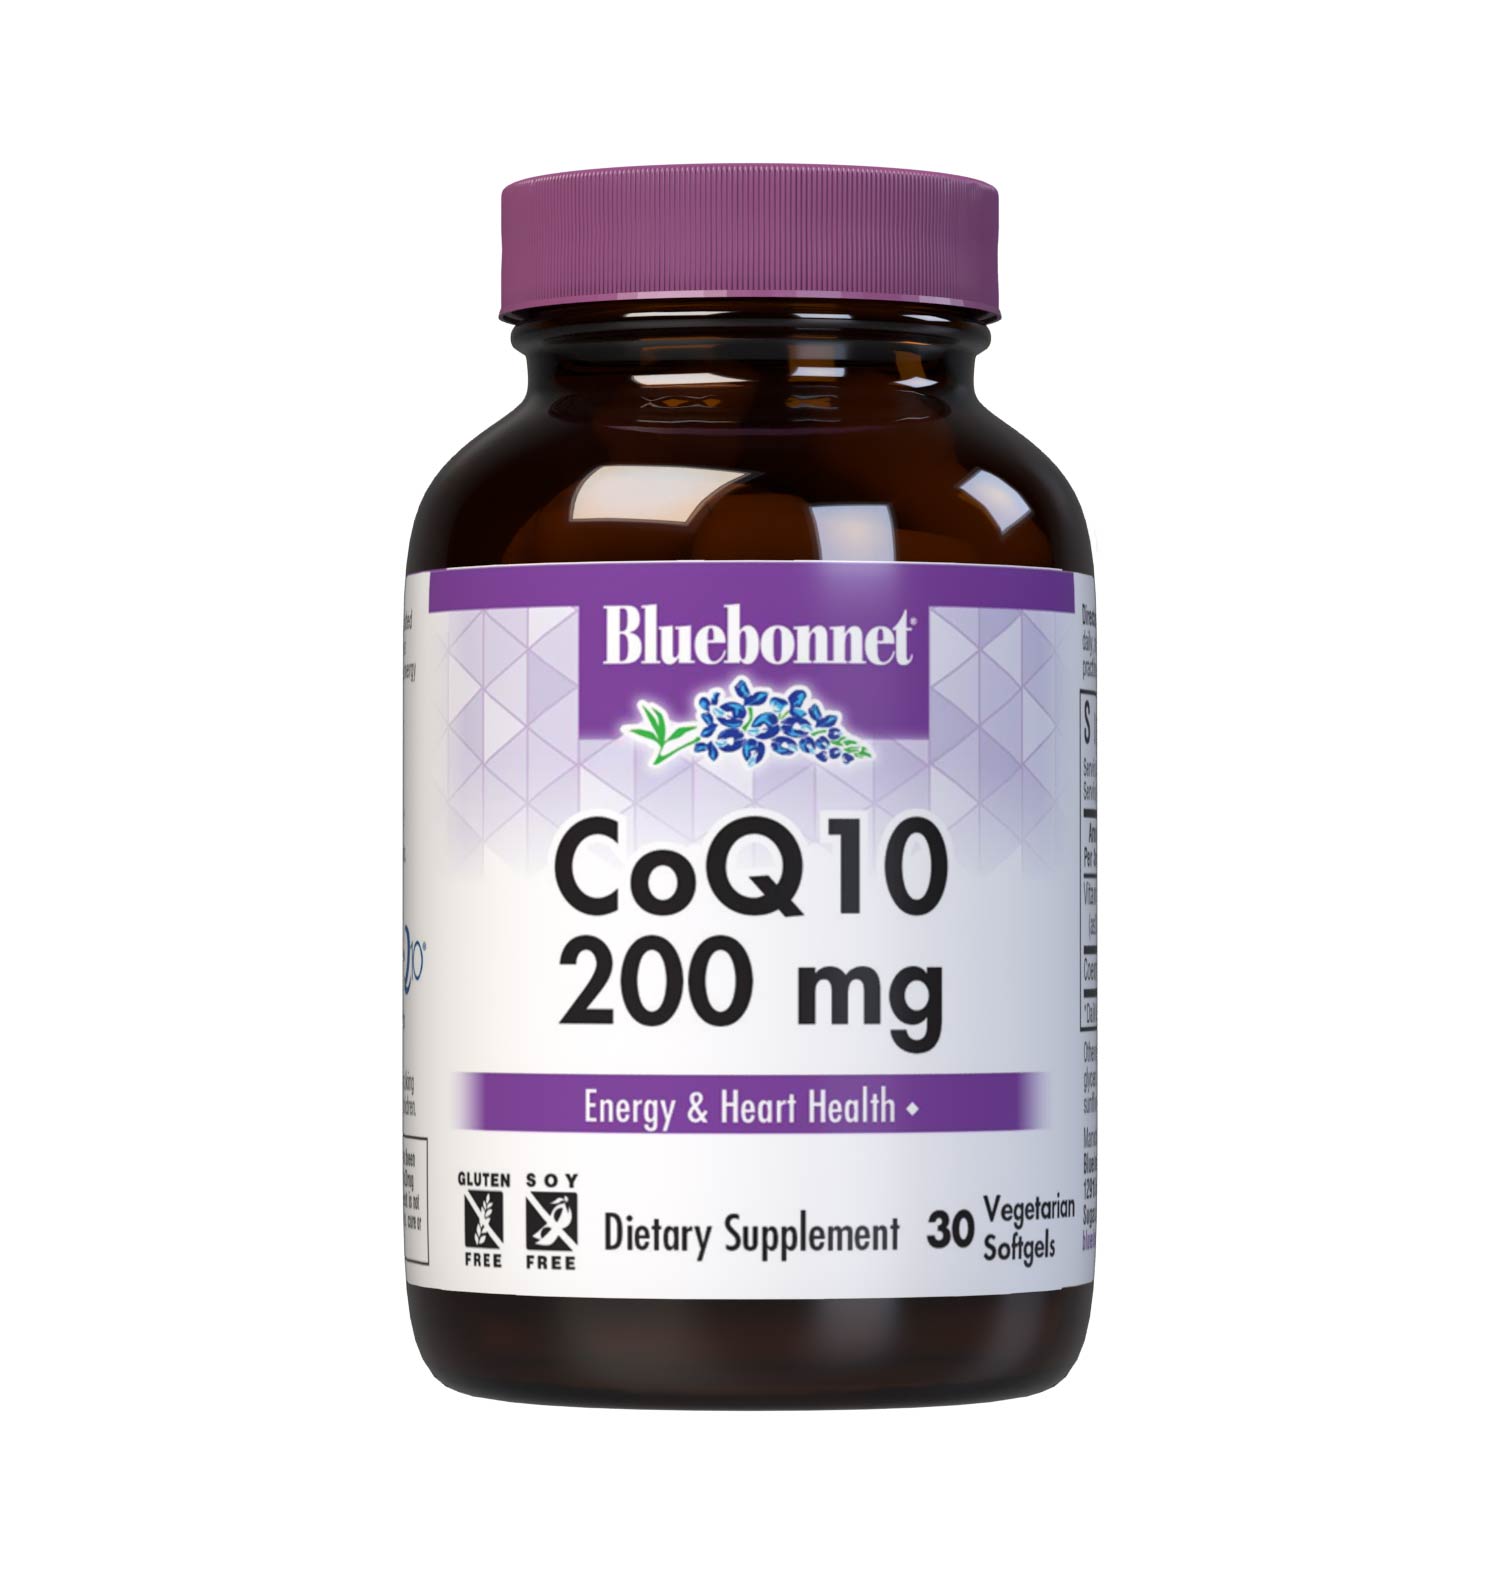 Bluebonnet’s CoQ10 200 mg 30 Vegetarian Softgels are formulated with the trans-isomer form of CoQ10 (ubiquinone) in a base of non-GMO sunflower oil along with vitamin E to help support energy levels and heart health. #size_30 count